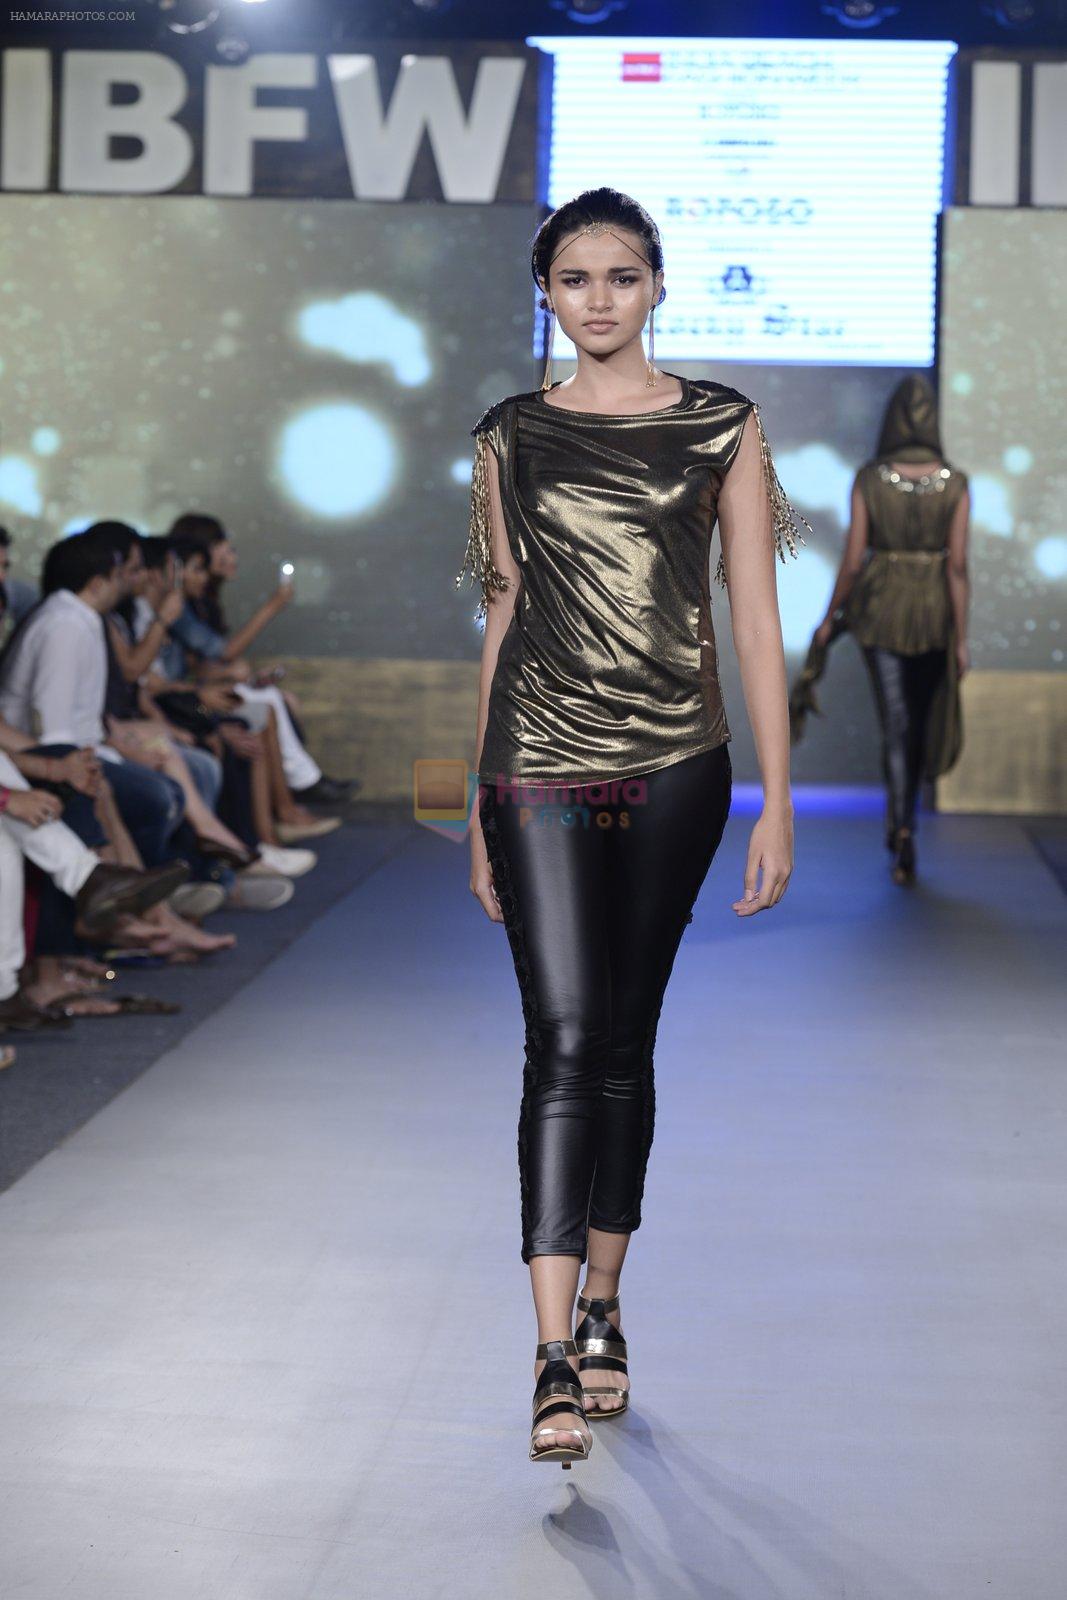 Model walk the ramp for Rocky S Show on day 2 of Gionee India Beach Fashion Week on 30th Oct 2015